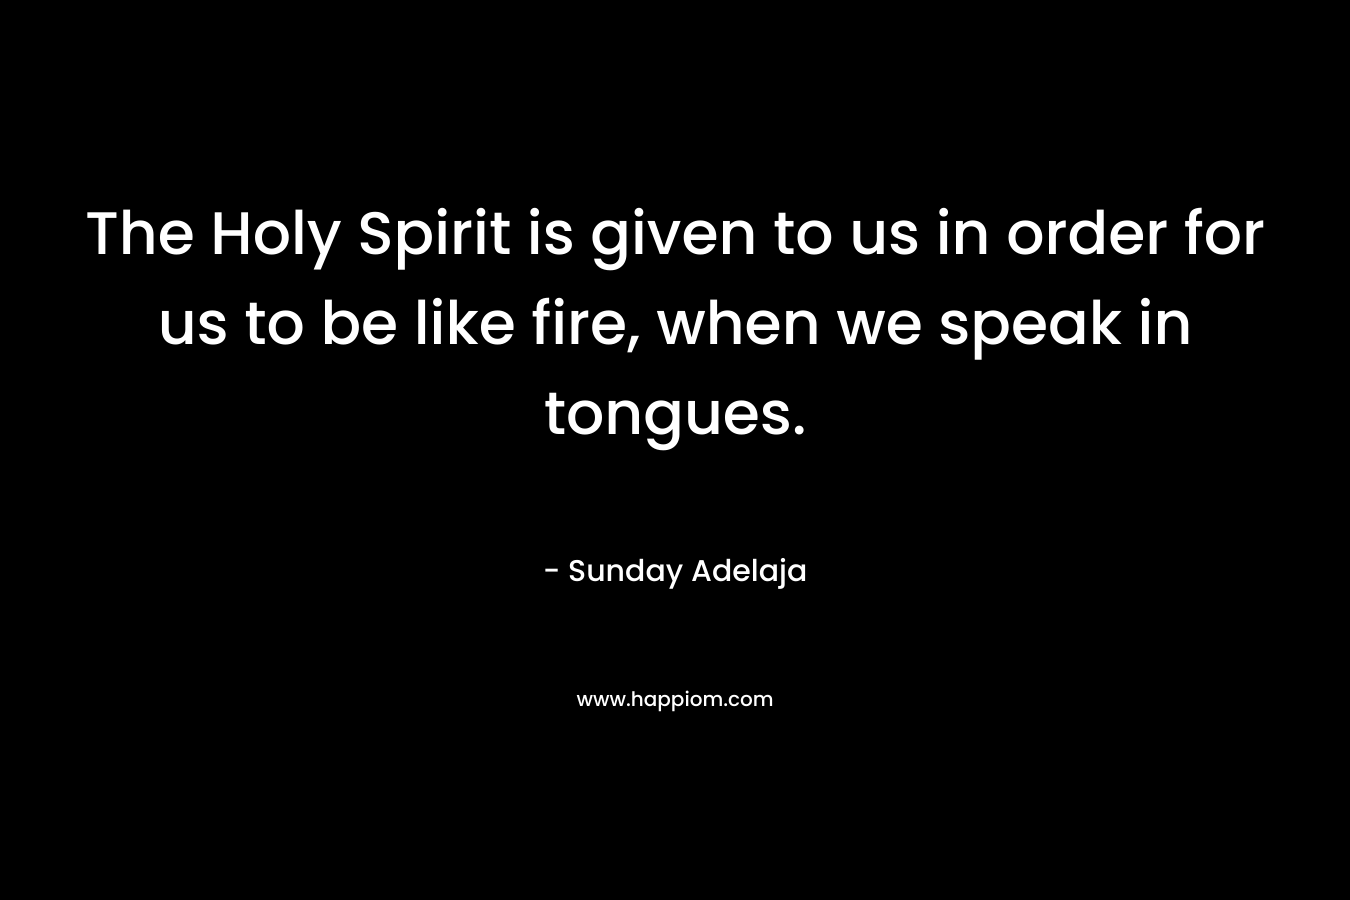 The Holy Spirit is given to us in order for us to be like fire, when we speak in tongues.